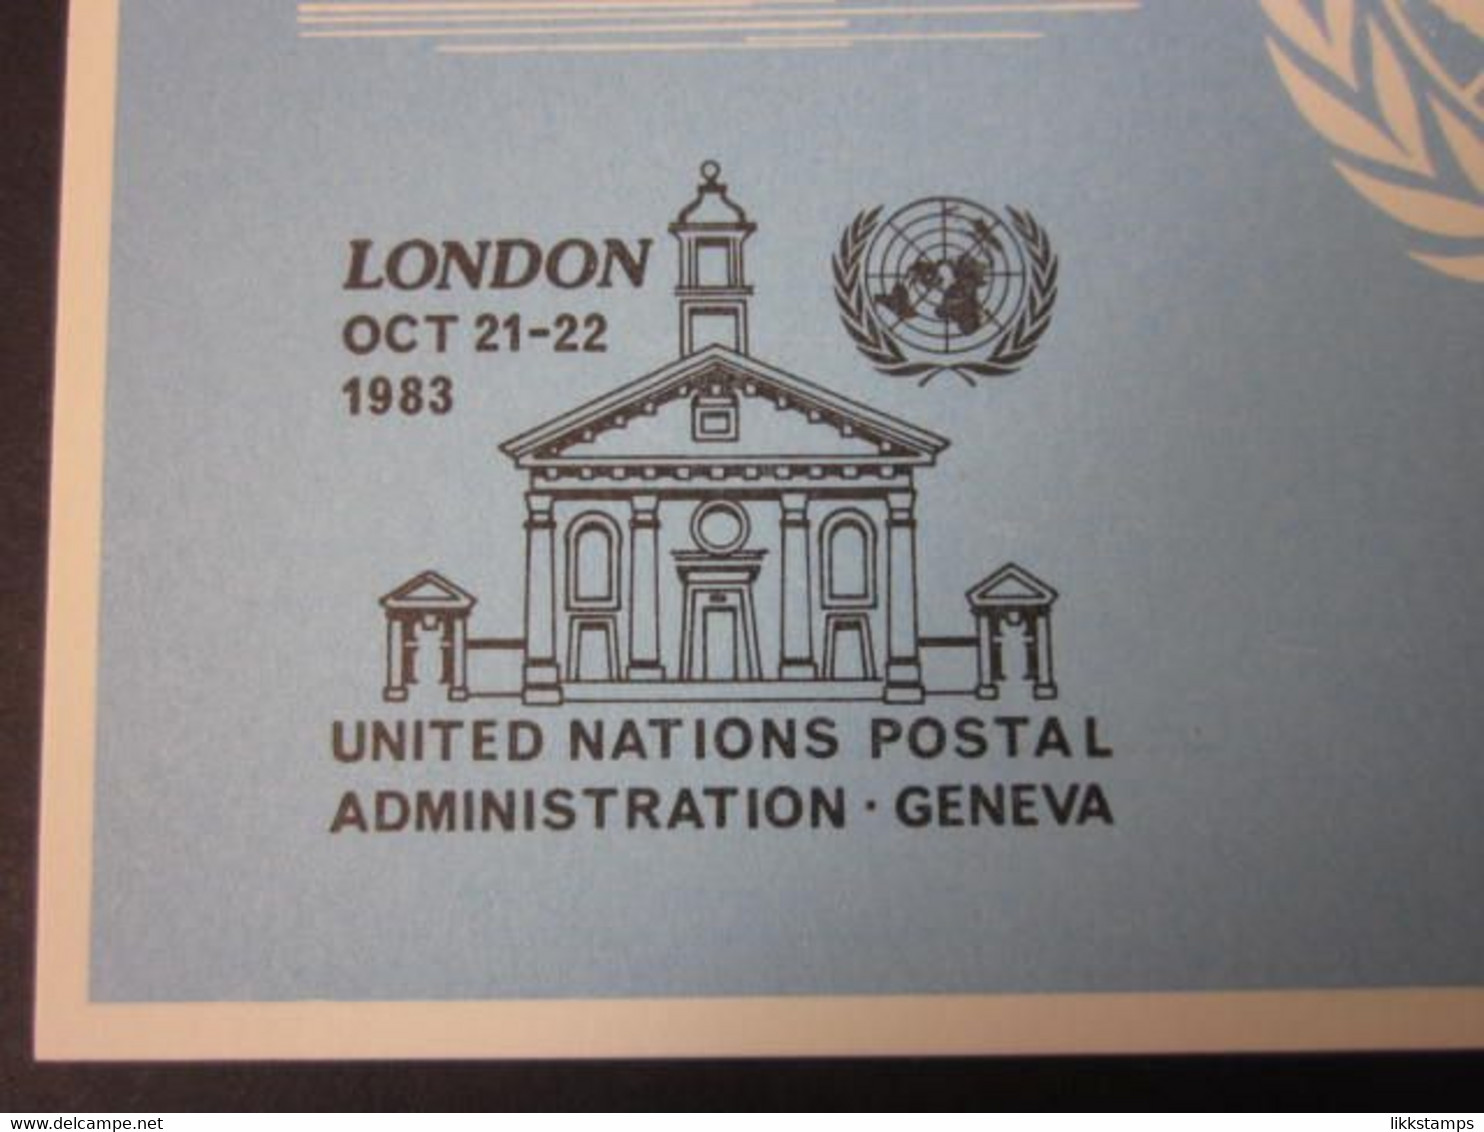 A RARE LONDON 1983 EXHIBITION SOUVENIR CARD WITH FIRST DAY OF EVENT CANCELLATION. ( 02285 ) - Briefe U. Dokumente